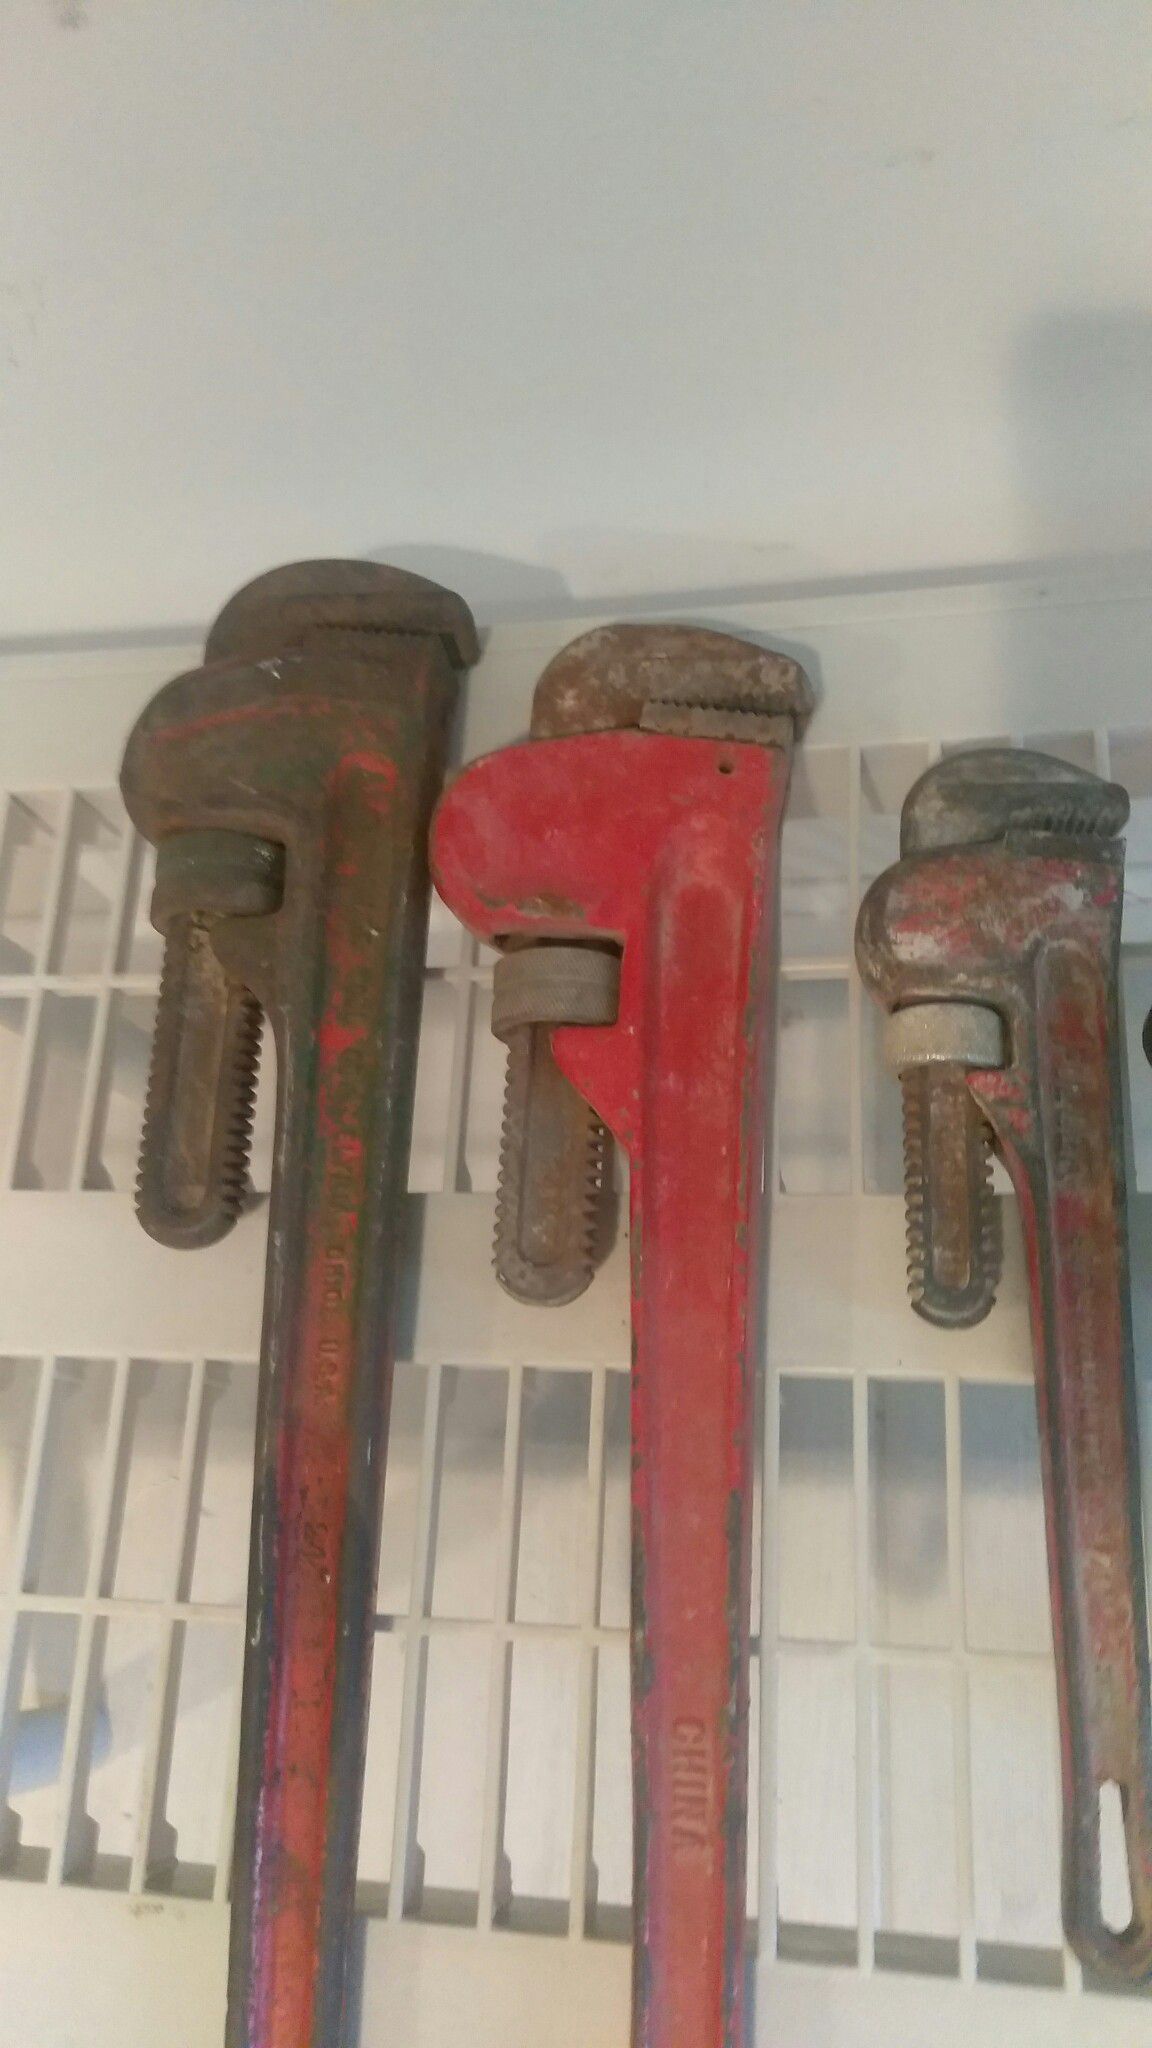 Pipe monkey wrenches